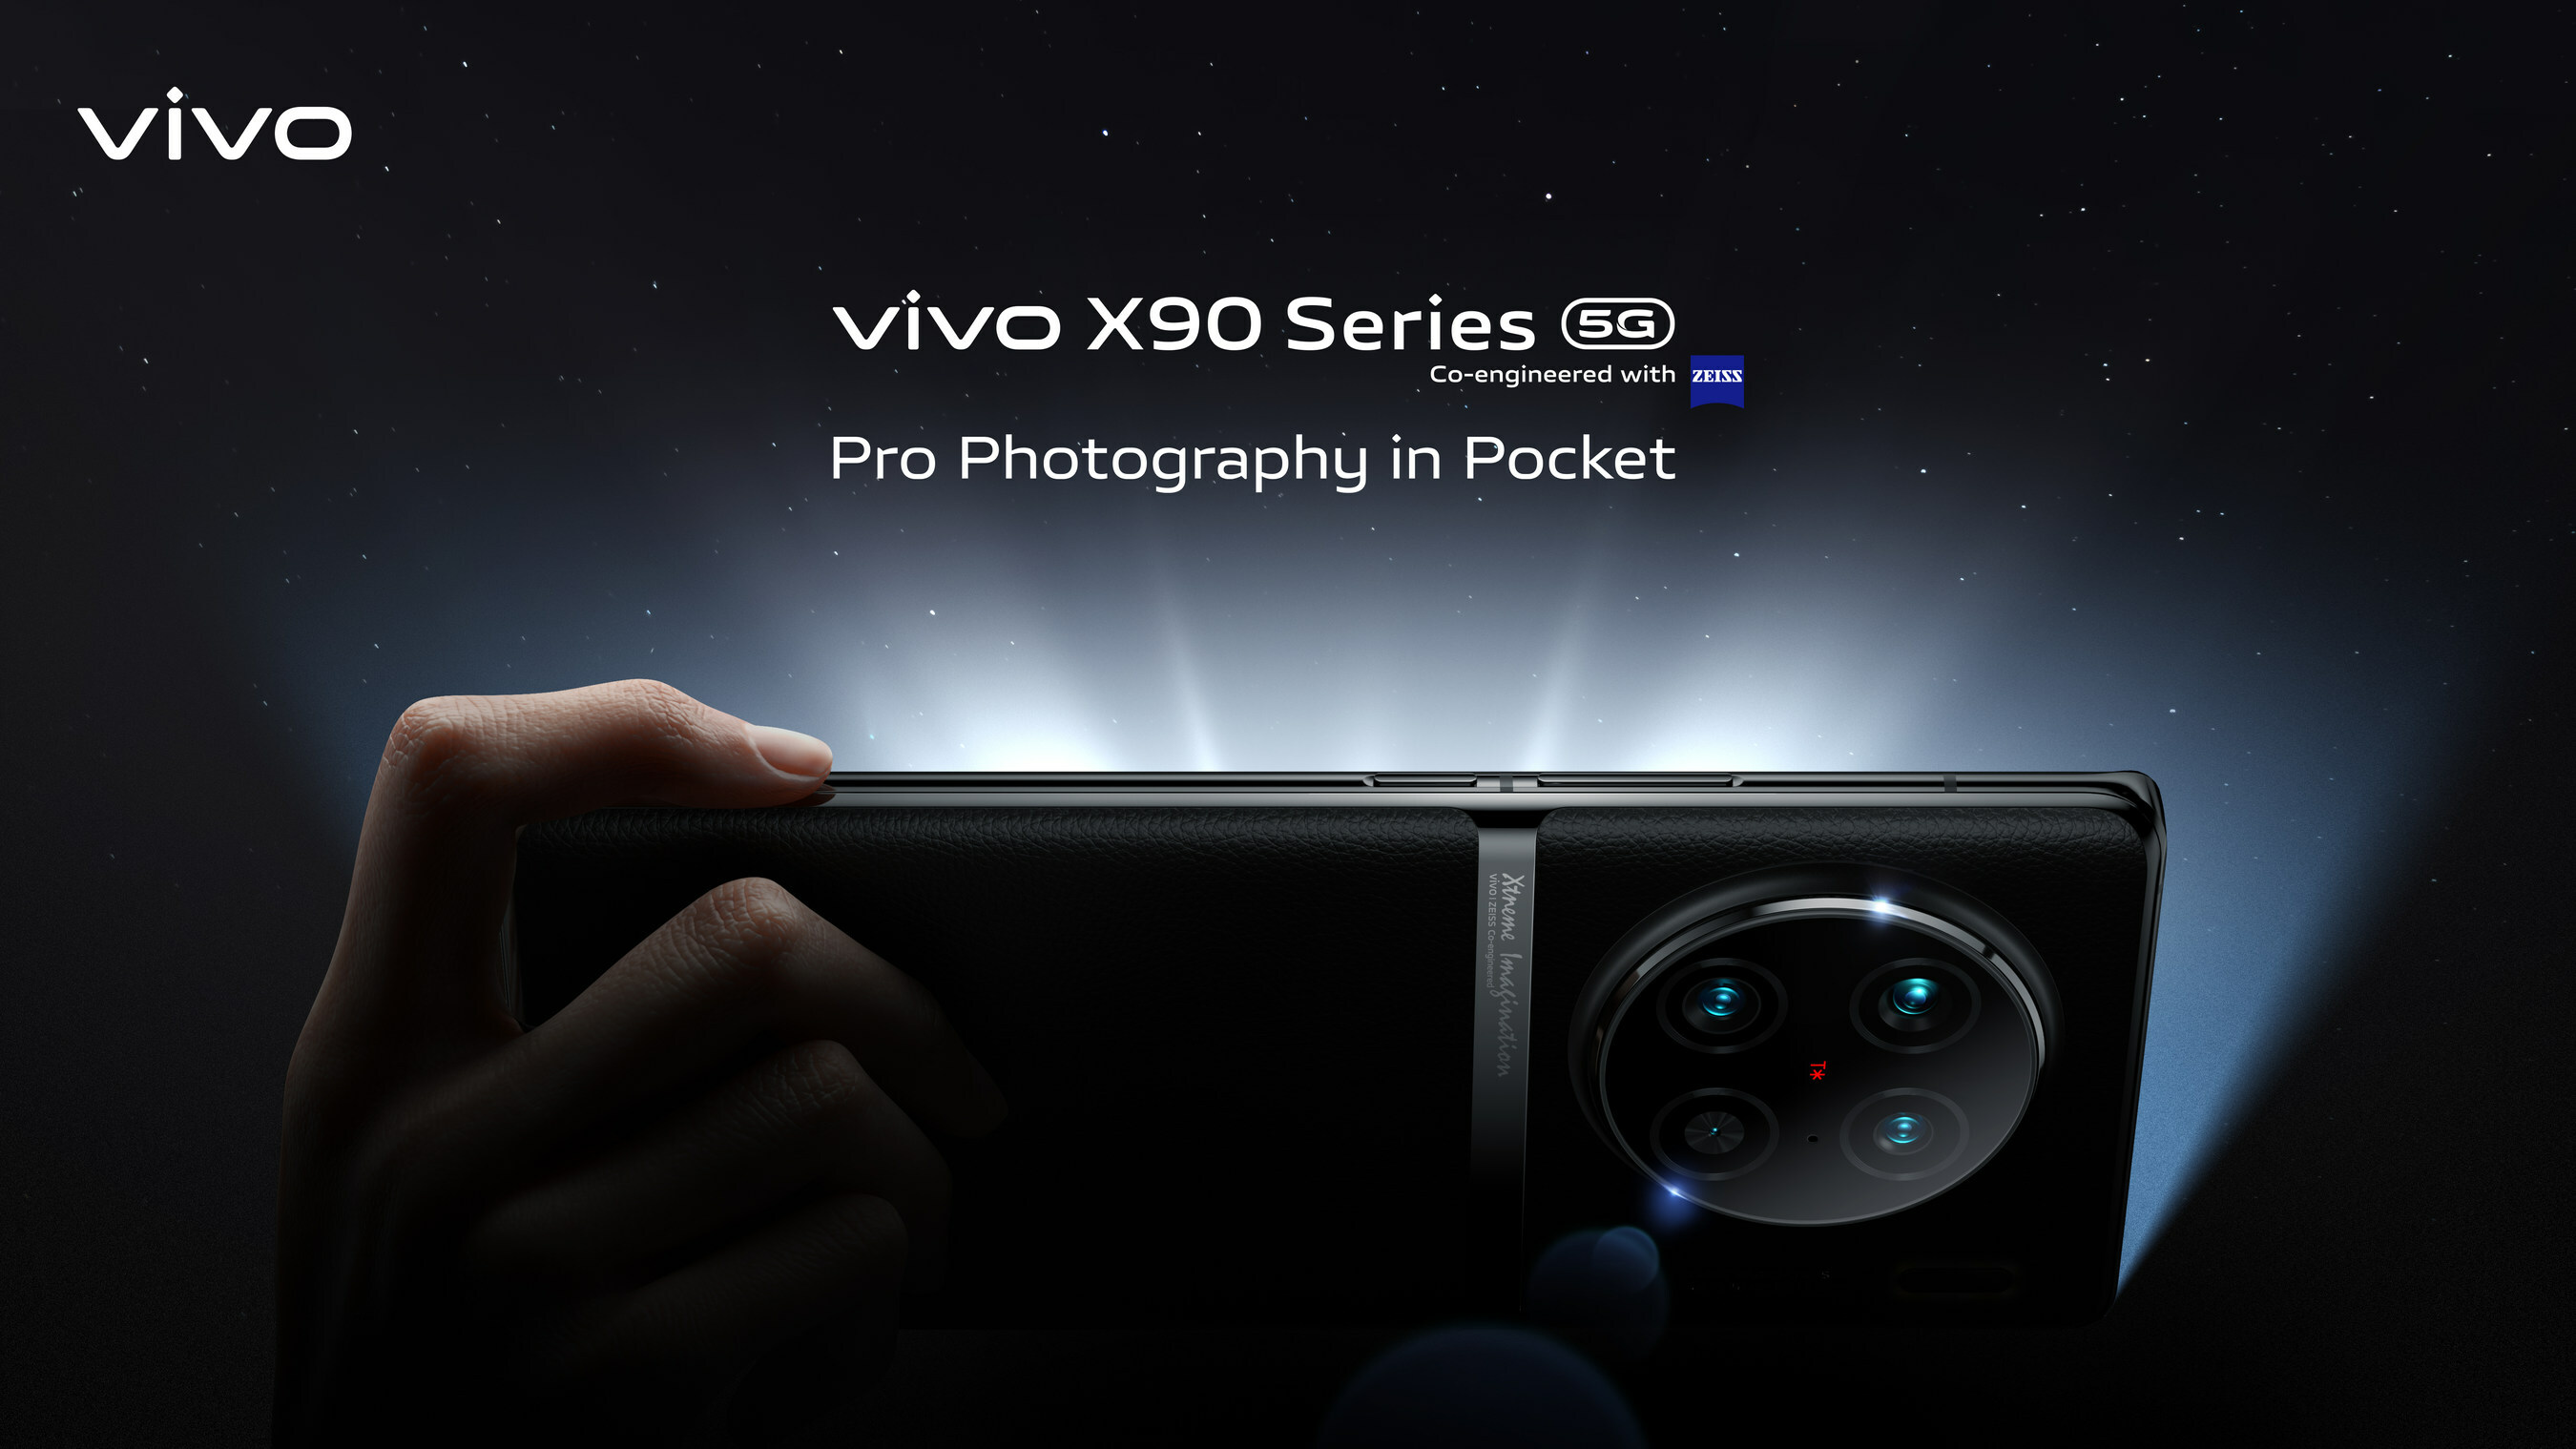 Vivo X90 Pro Plus specs leaked ahead of launch: Here's what we know so far